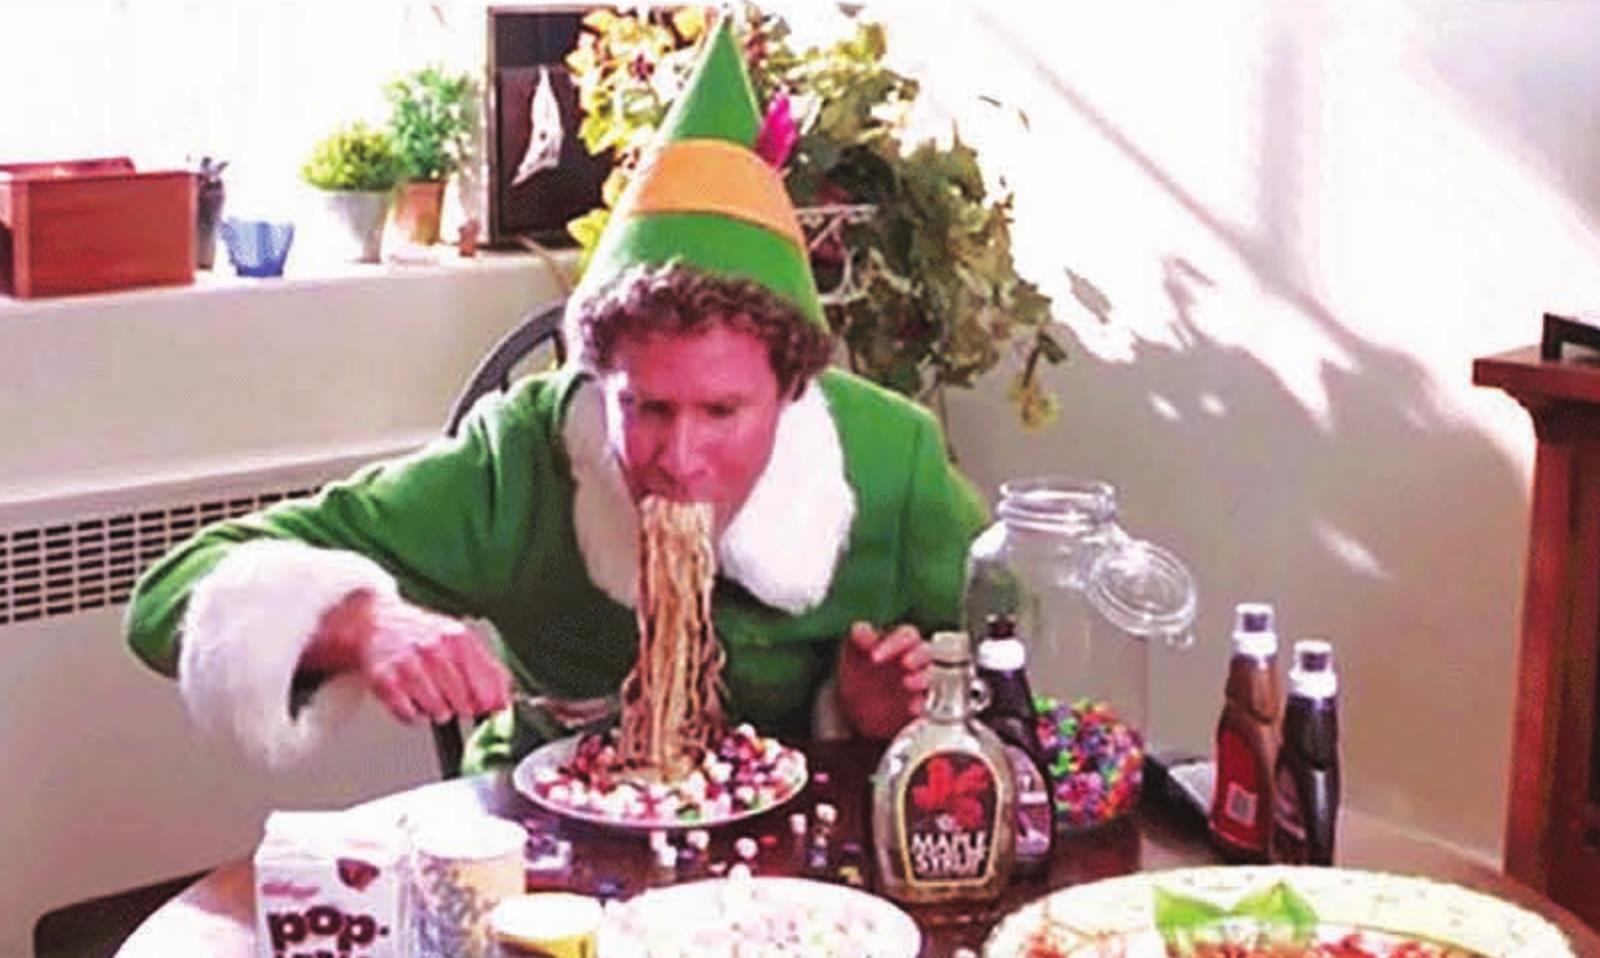 Actor Will Ferrell, who plays Buddy in the movie Elf, is pictured in a scene from the movie eating spaghetti with maple syrup. Photo courtesy of Elf